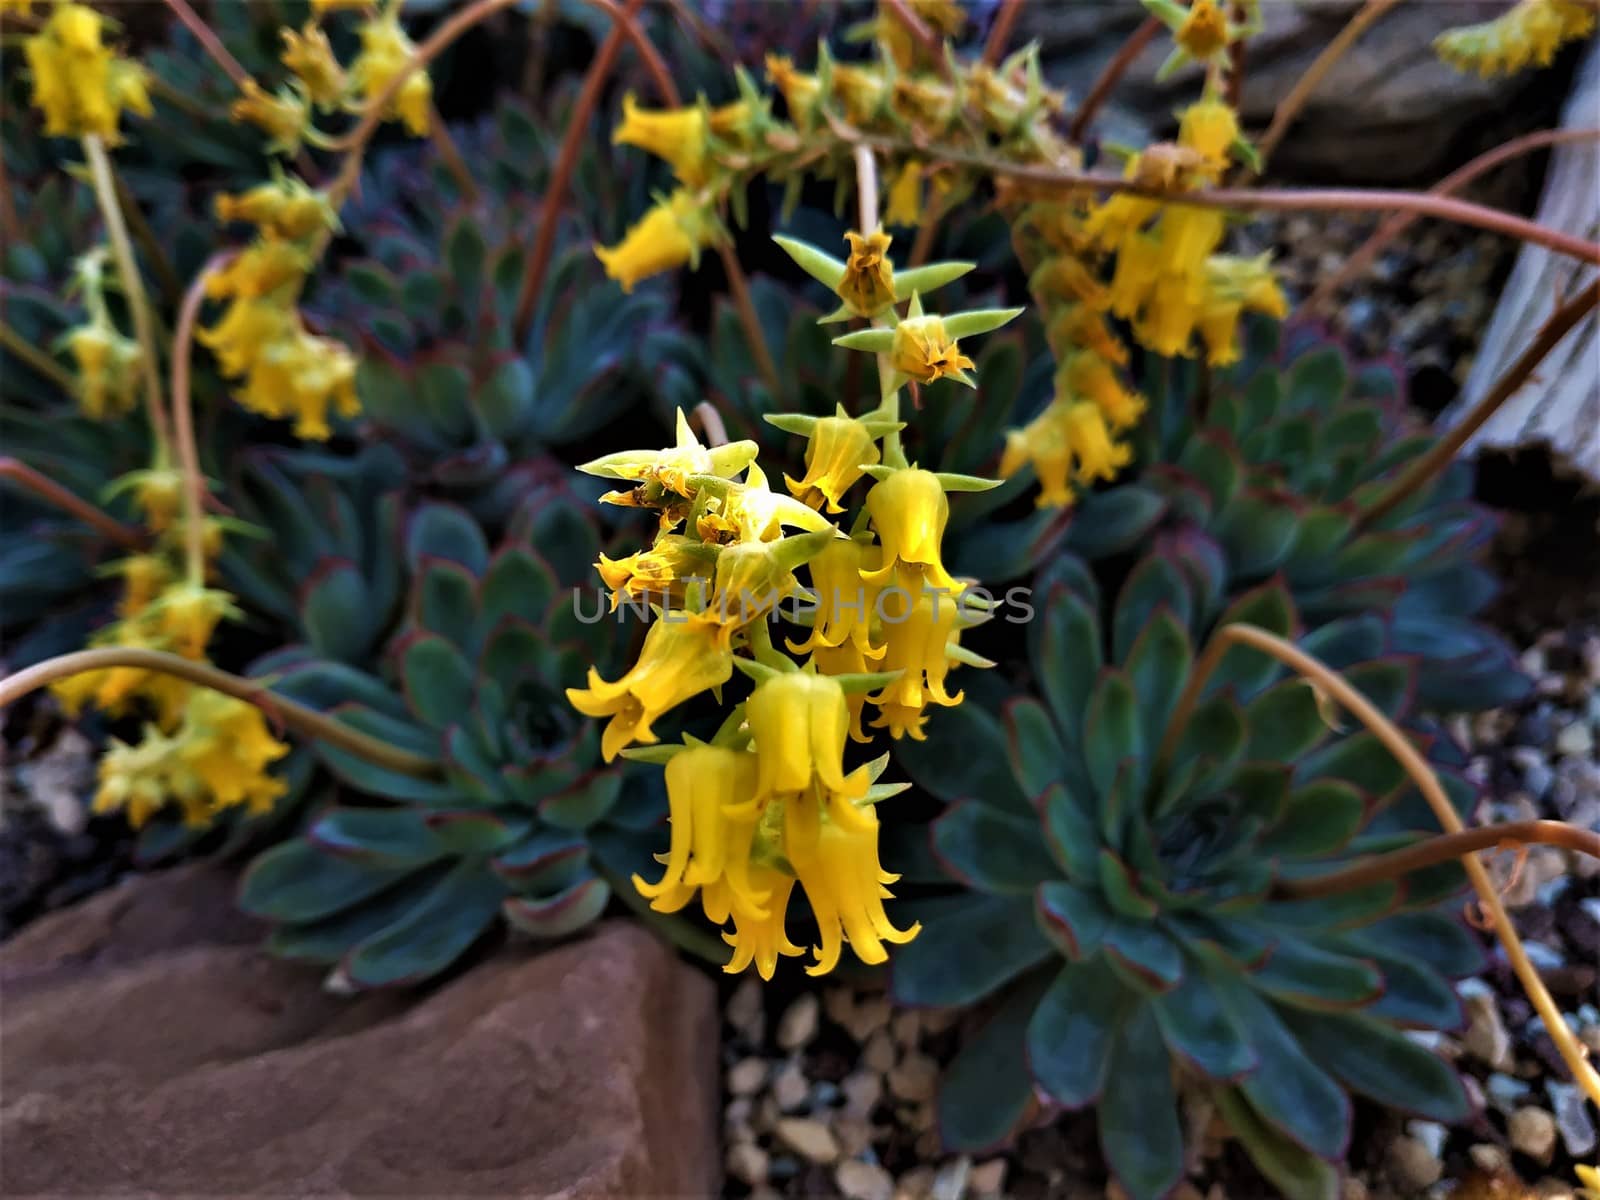 Yellow blossoms of an Echeveria pulidonis succulent plant